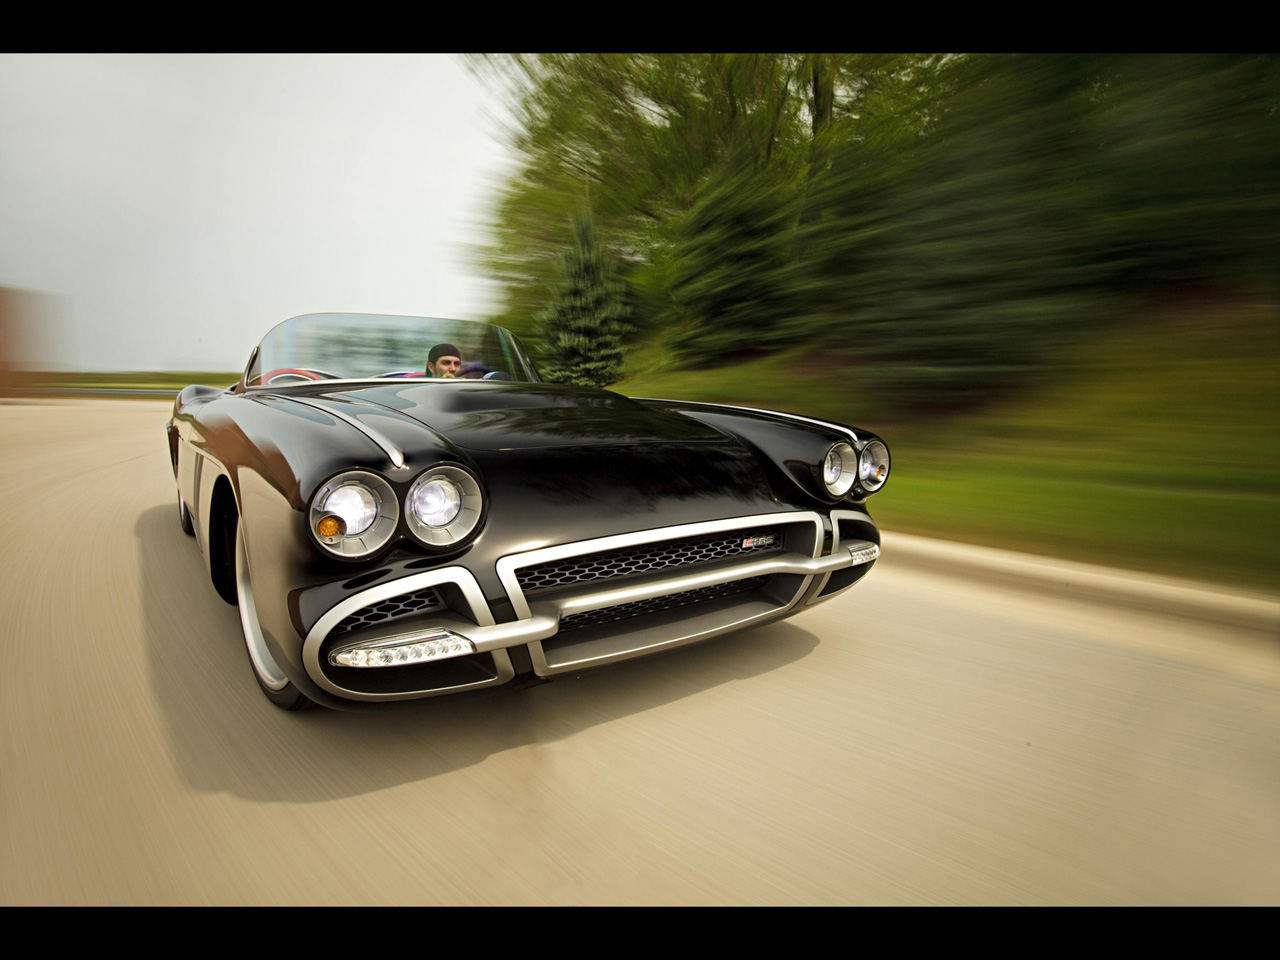 1962-Chevrolet-Corvette-C1-RS-by-Roadster-Shop-Front-Angle-Speed-4-1280x960.jpg